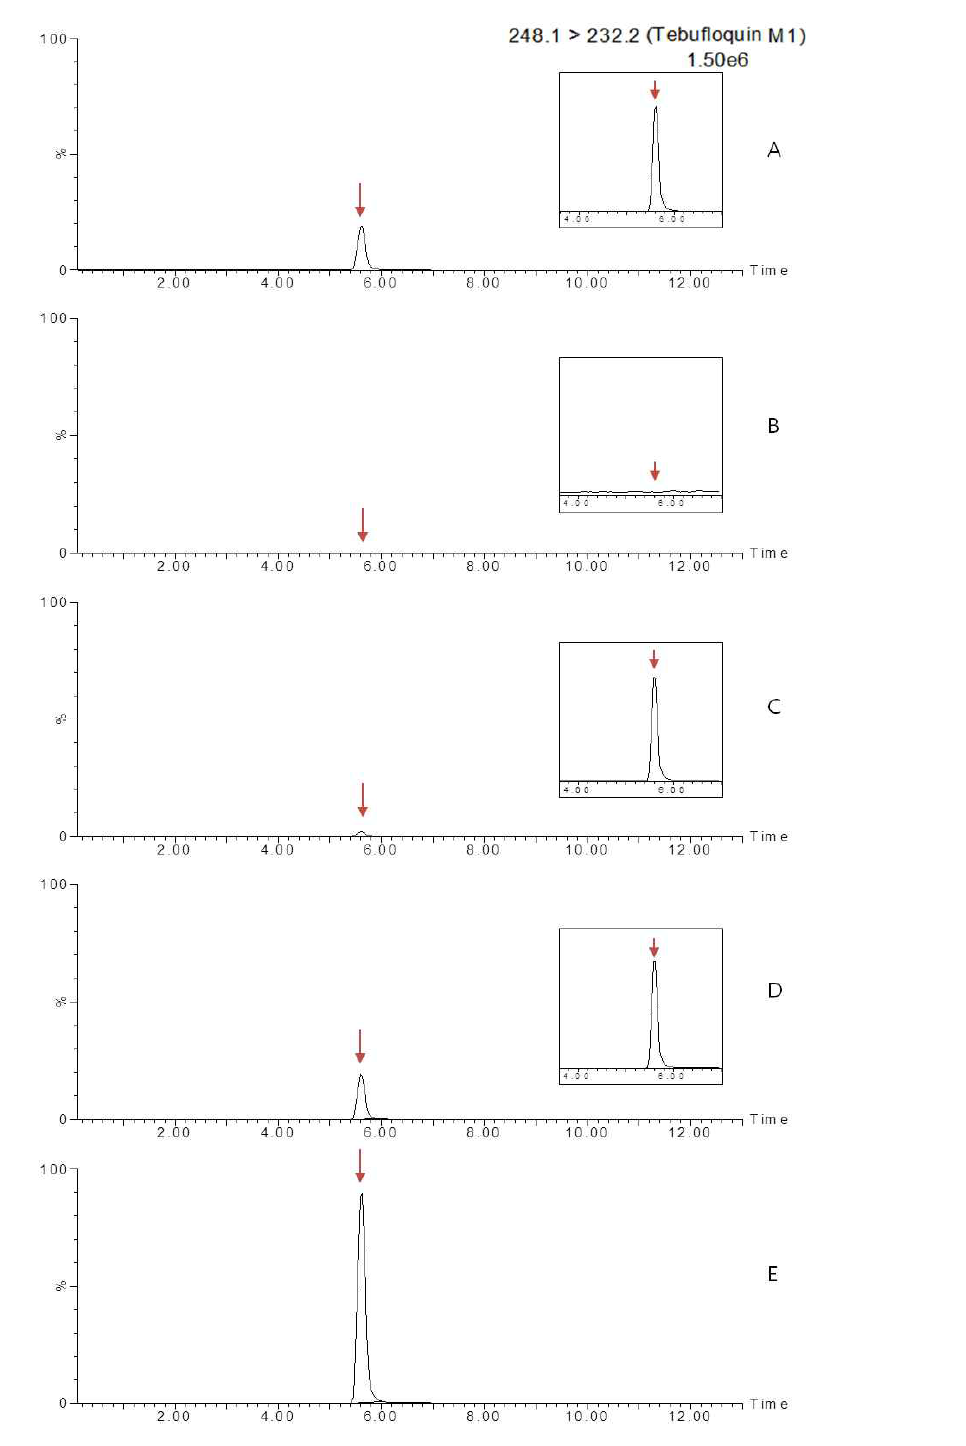 Representative MRM(quantification ion) chromatograms of tebufloquin M1 corresponding to: (A) standard solution at 1 mg/kg, (B) potato control, (C) spiked at 0.01 mg/kg, (D) spiked at 0.1 mg/kg and (E) spiked at 0.5 mg/kg